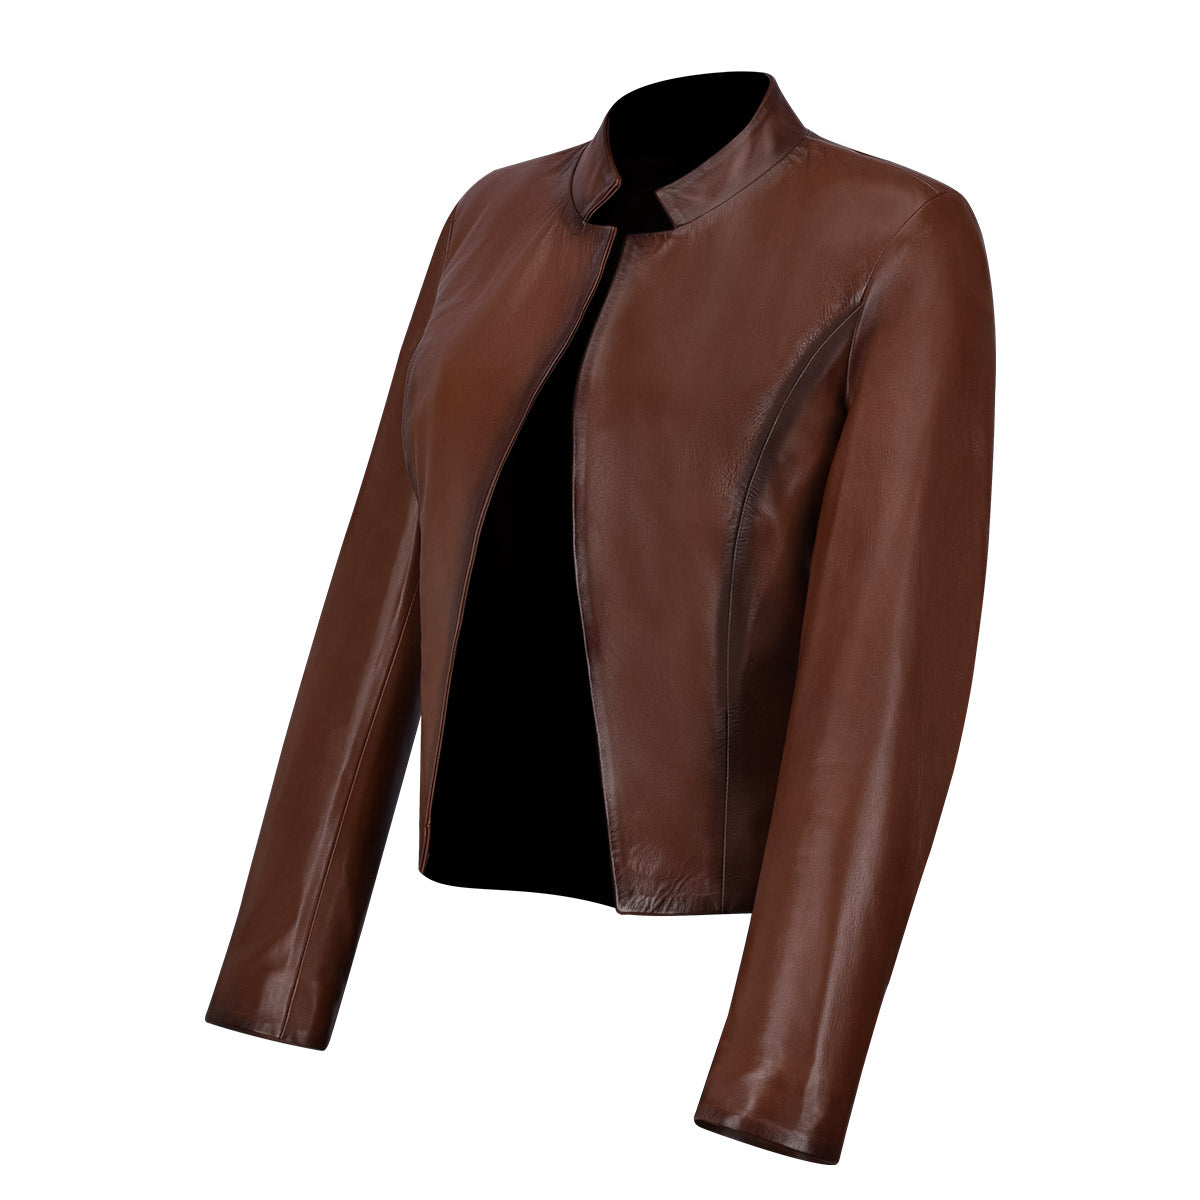 Womens brown leather short jacket, Jacket for women. With hadwoven details on the sides, with no closure at the front an minimalistic design.